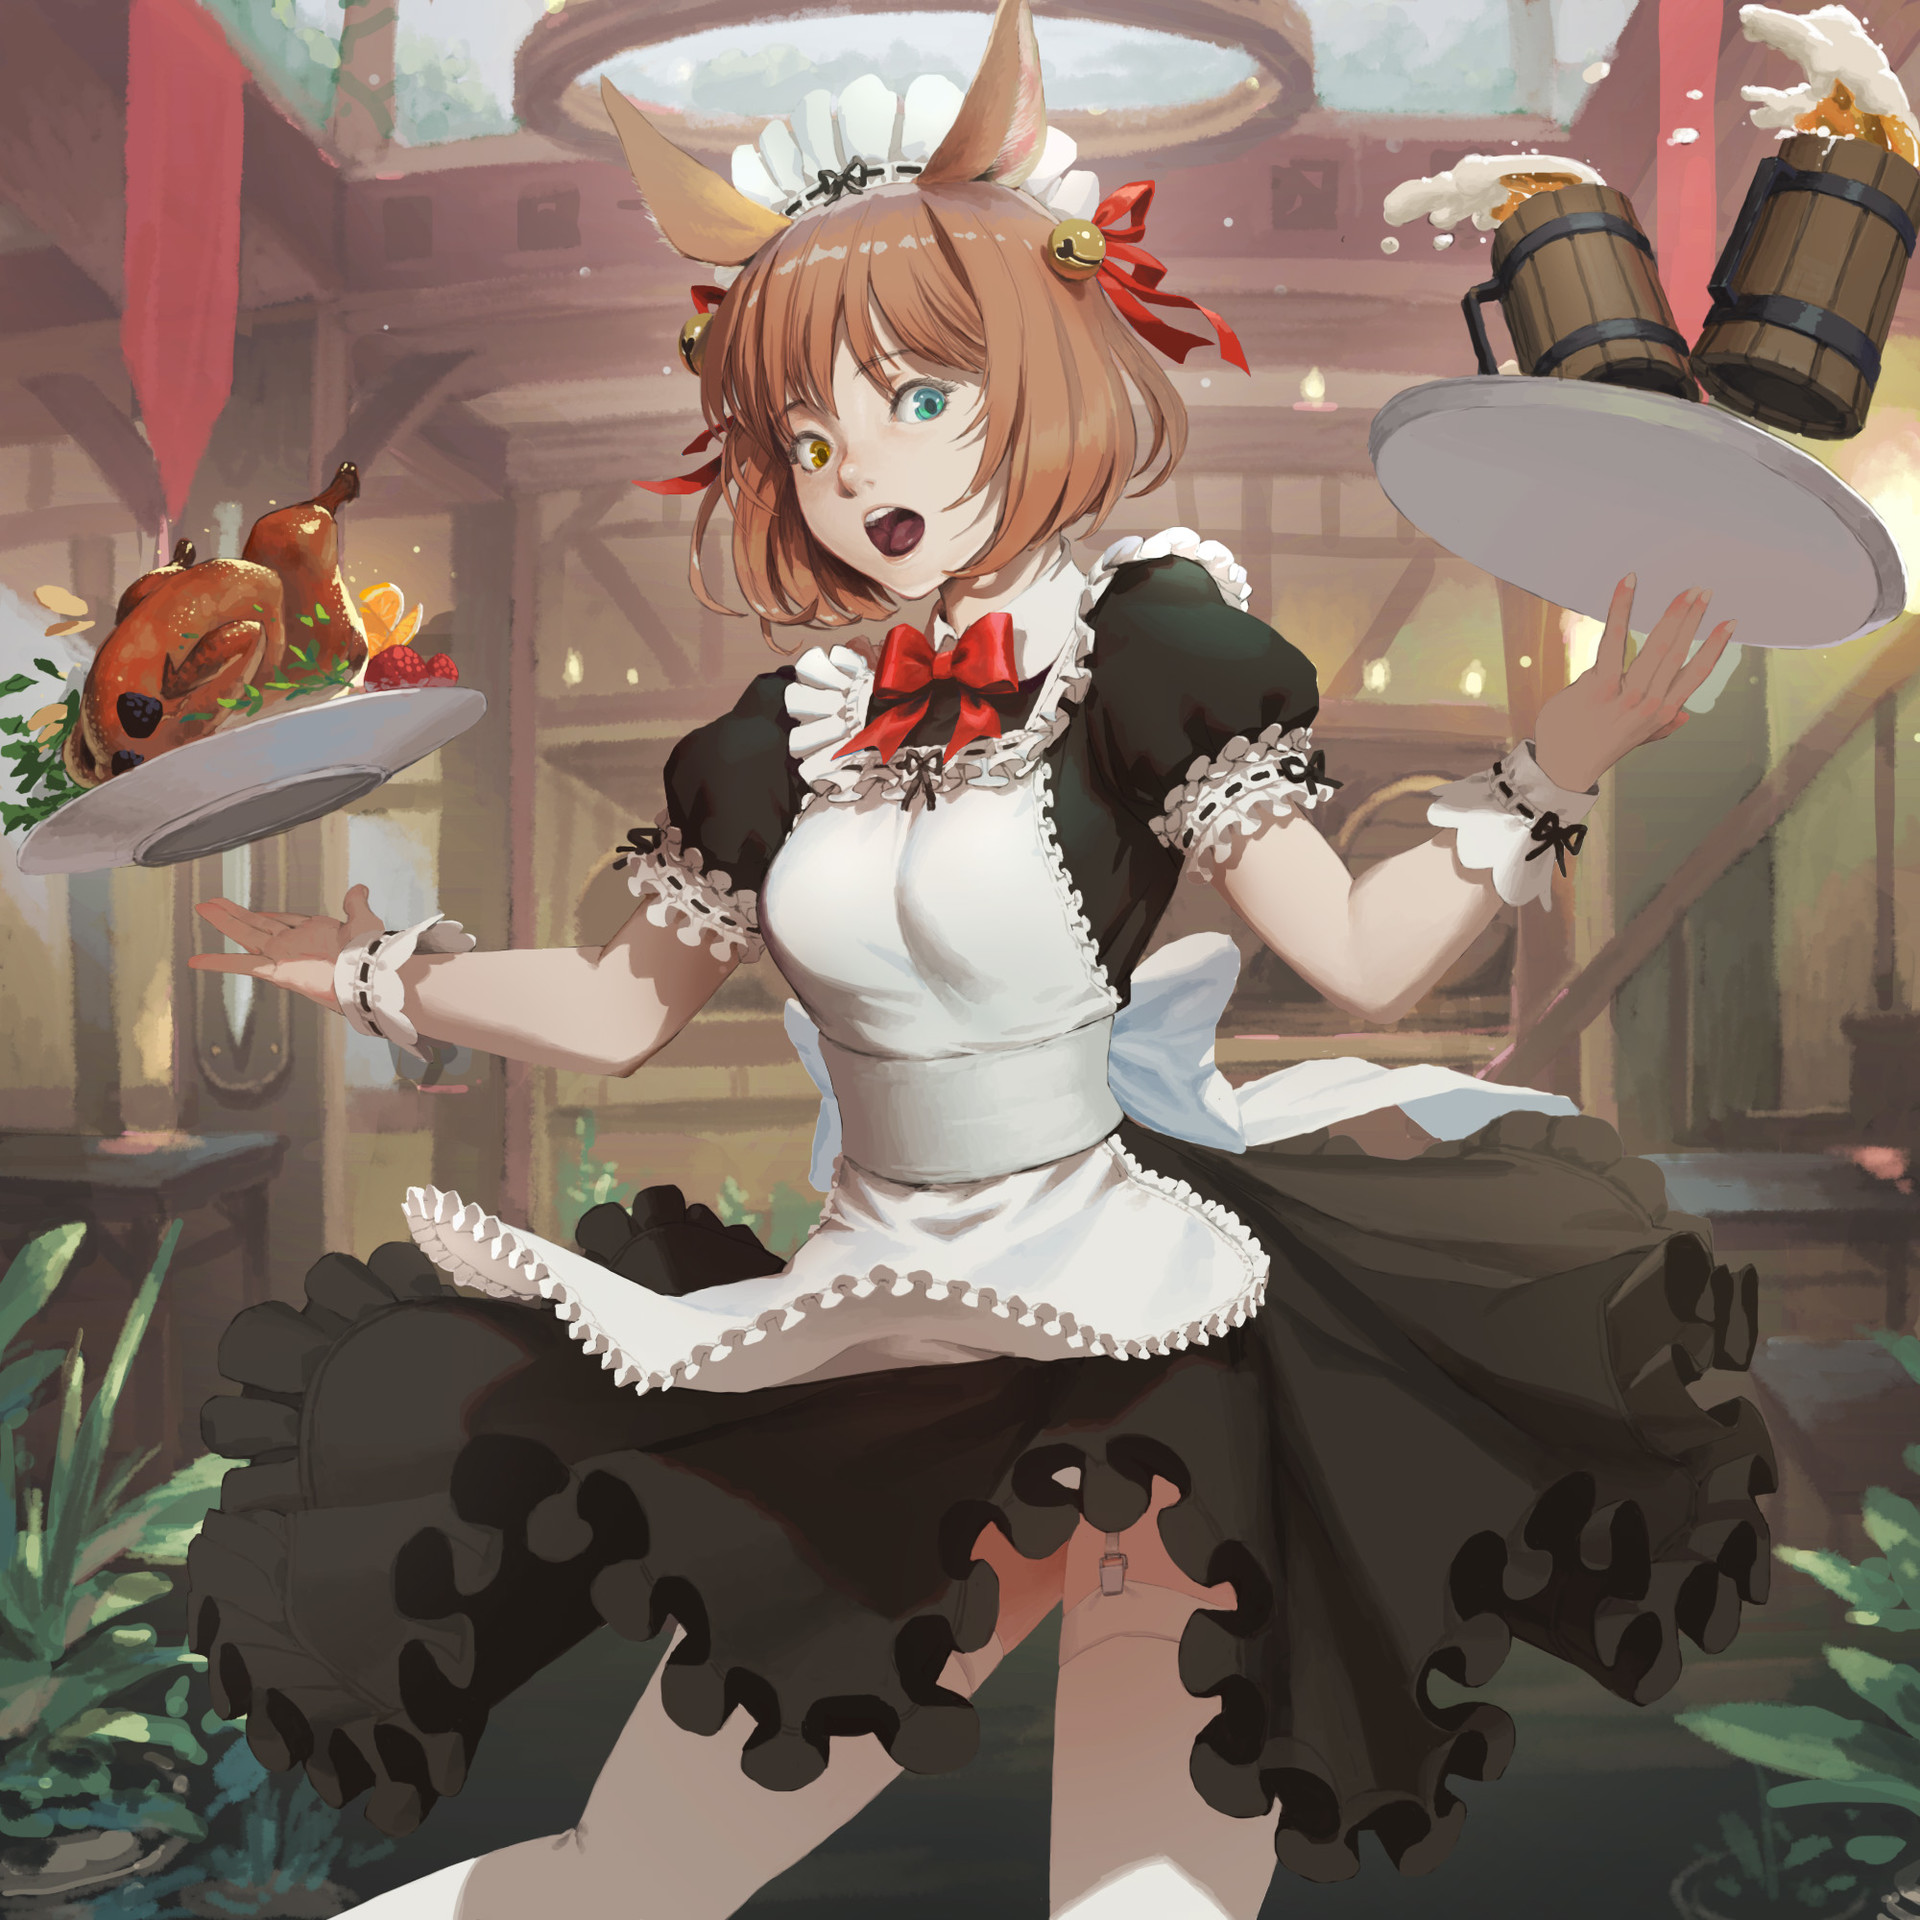 Anime 1920x1920 anime anime girls food heterochromia animal ears open mouth beer chickens brunette maid outfit thigh-highs waitress maid